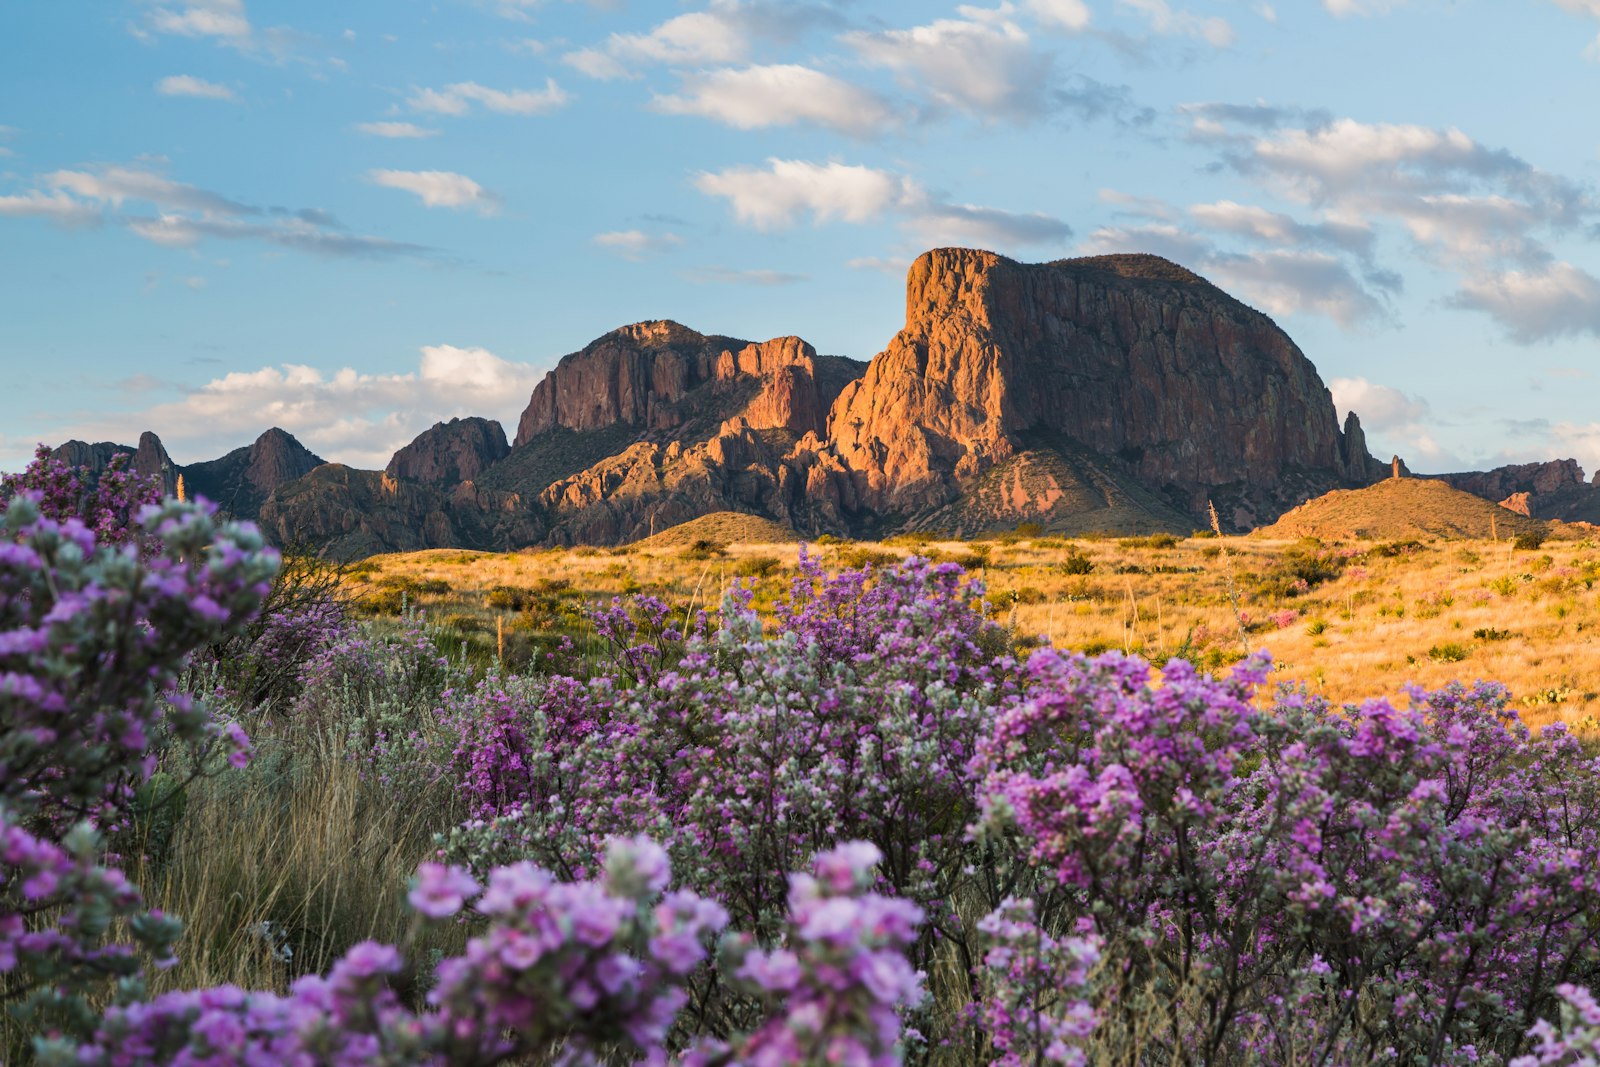 Purple wildflowers bloom in the foreground. In the distance are large red-brown rock formations, made golden by the sunlight